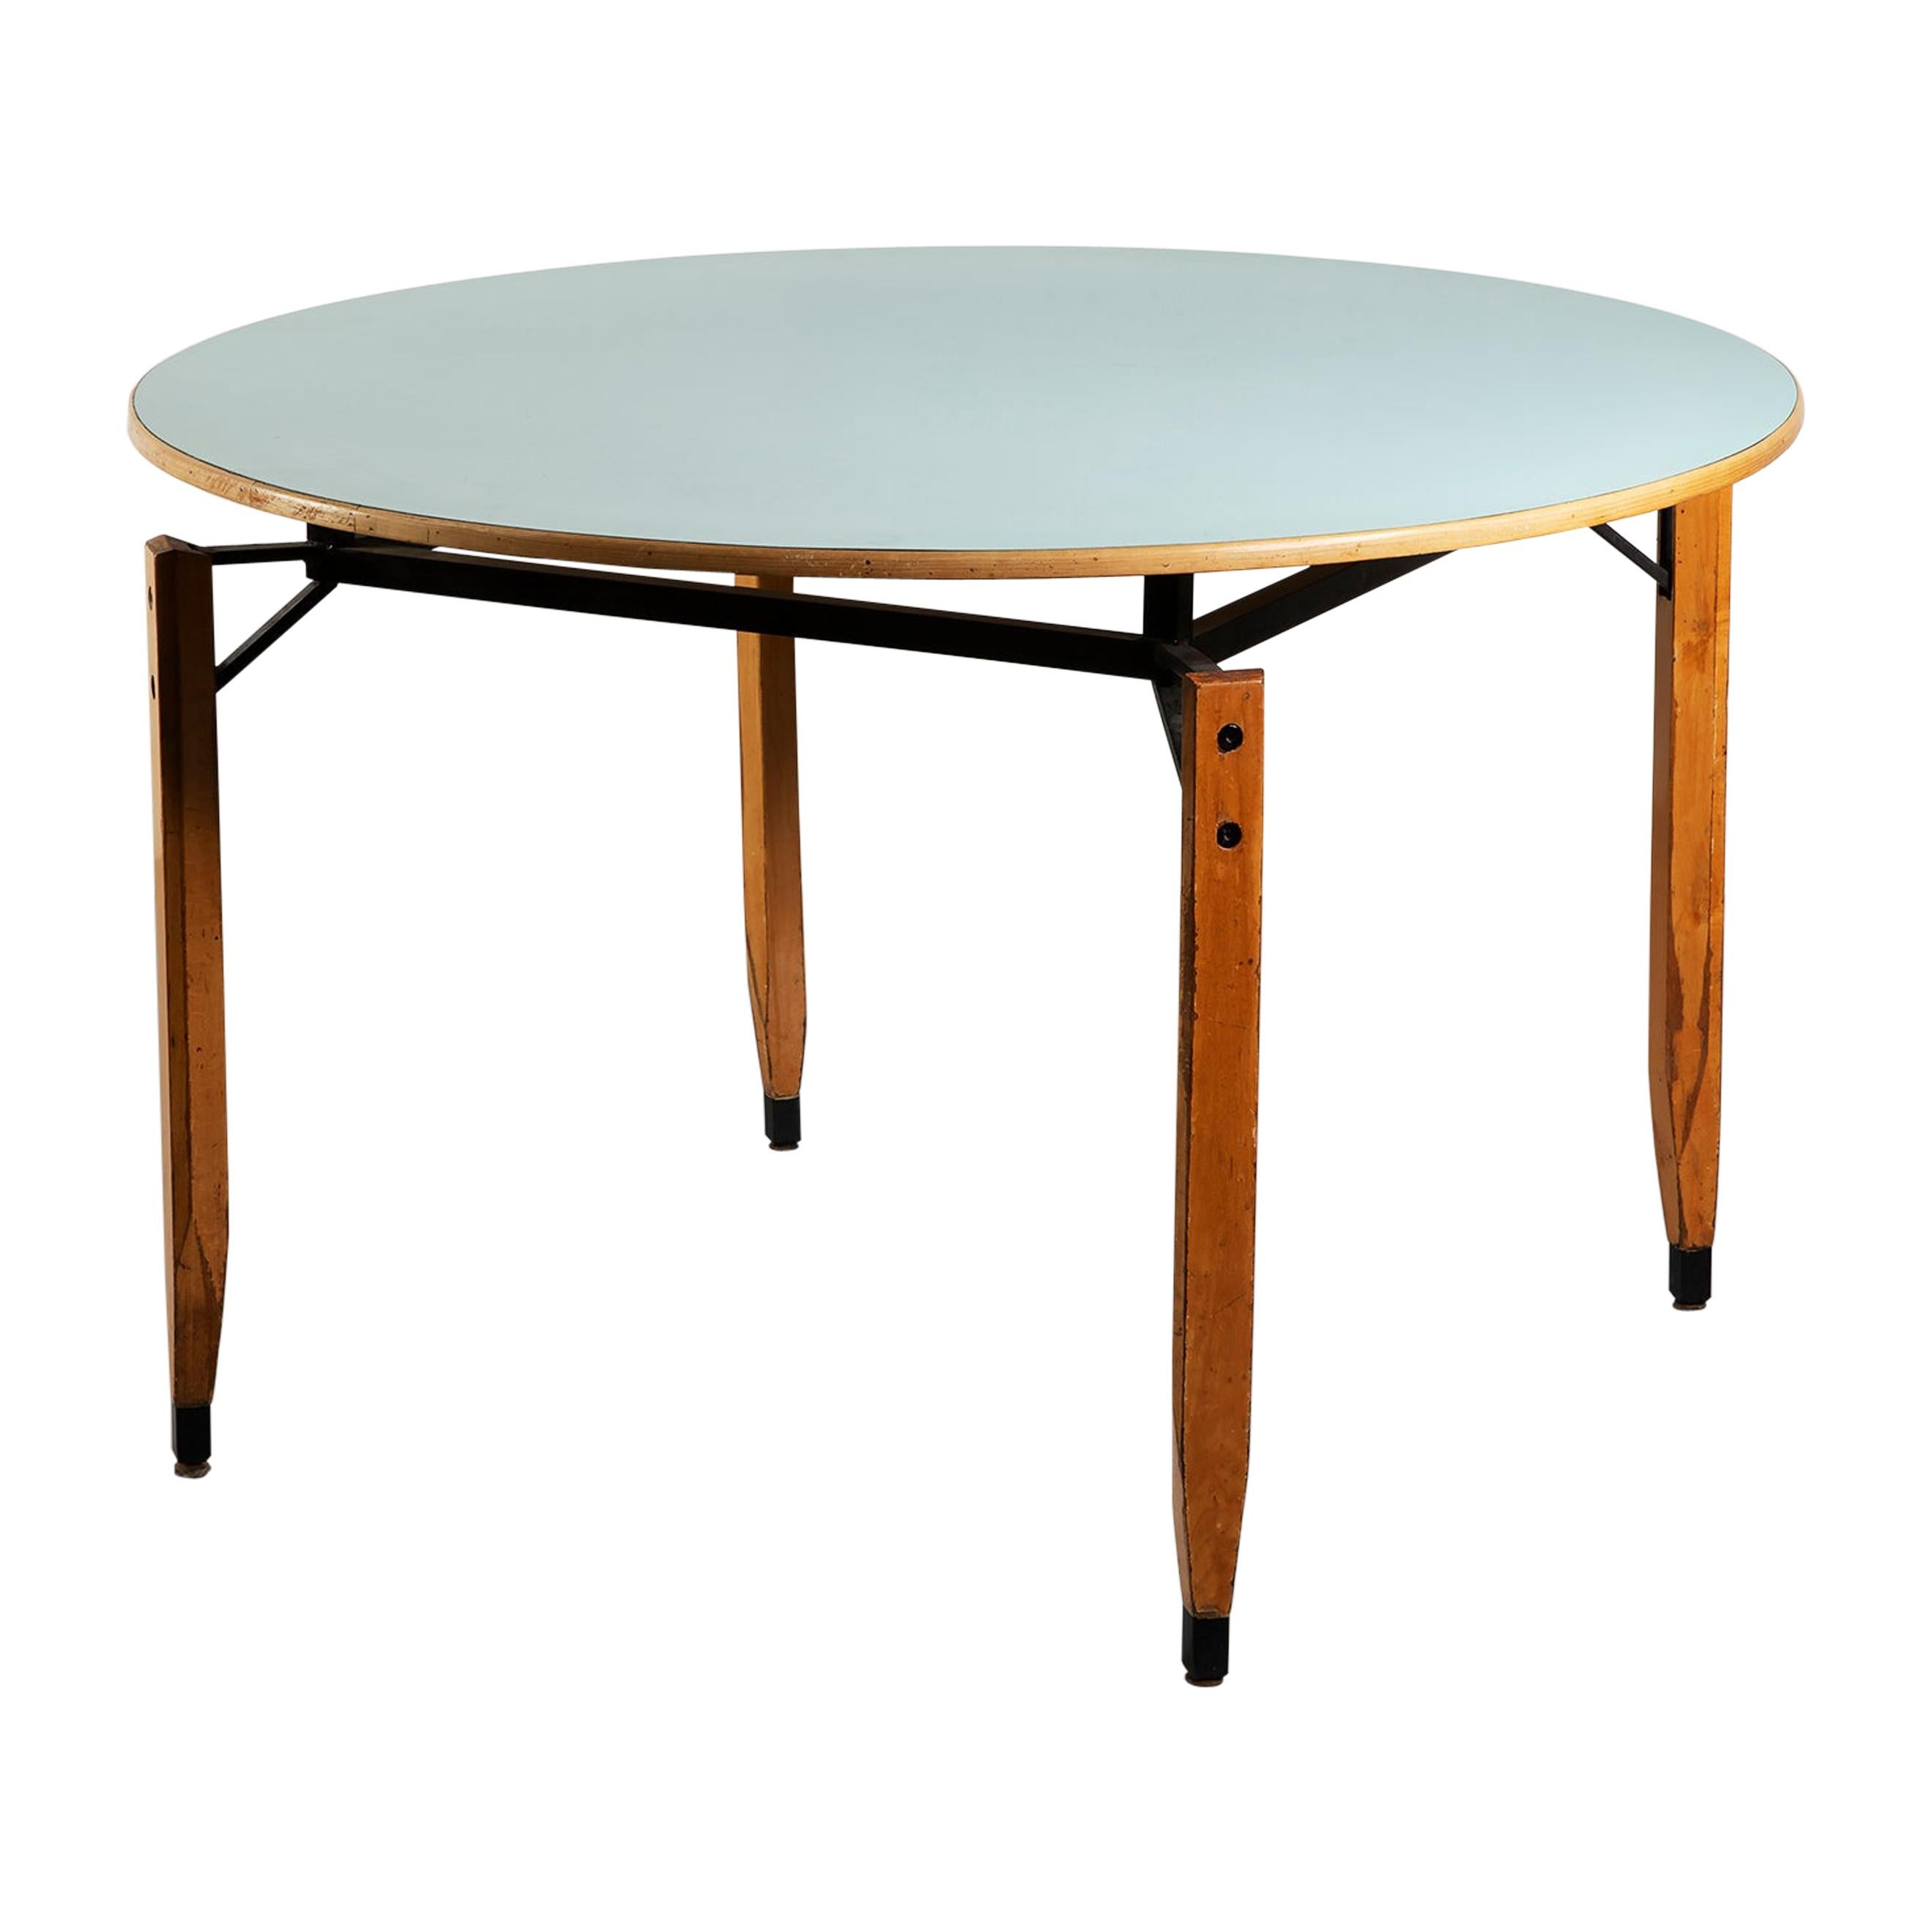 Roberto Aloi Oakwood and Light Blue Plastic Italian Round Dining Table, 1950s For Sale